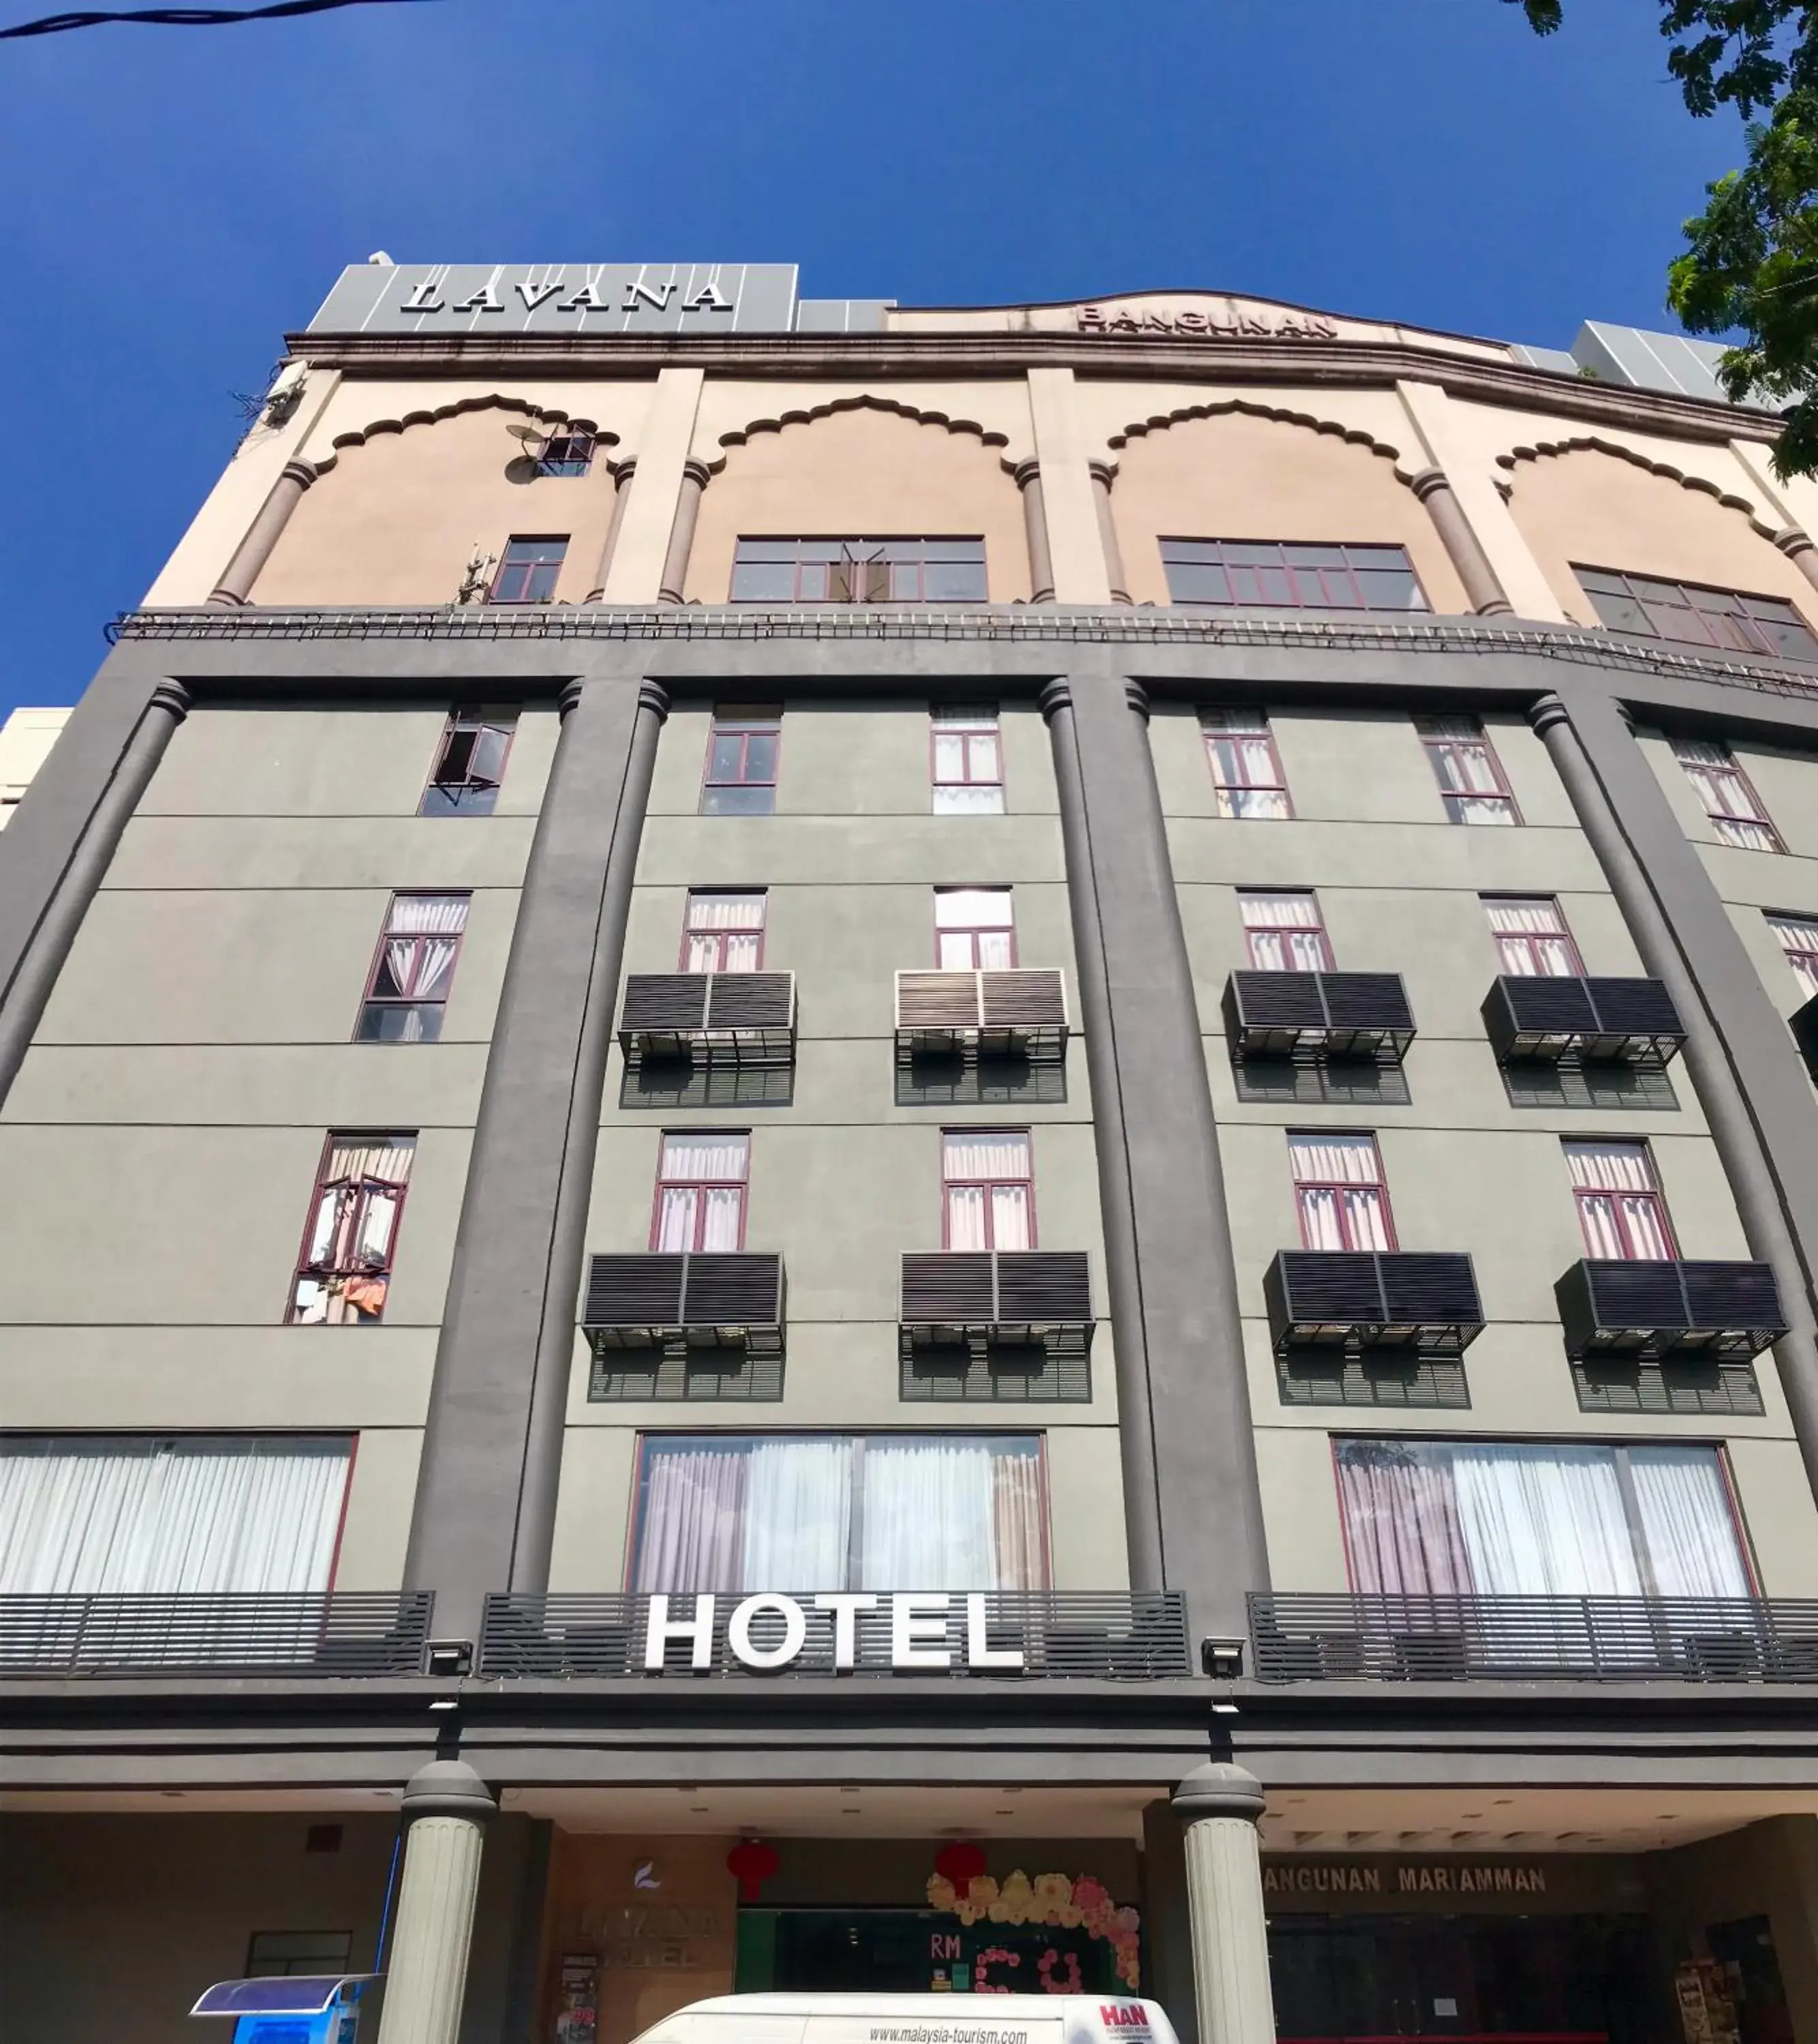 Property Building in Lavana Hotel, Chinatown